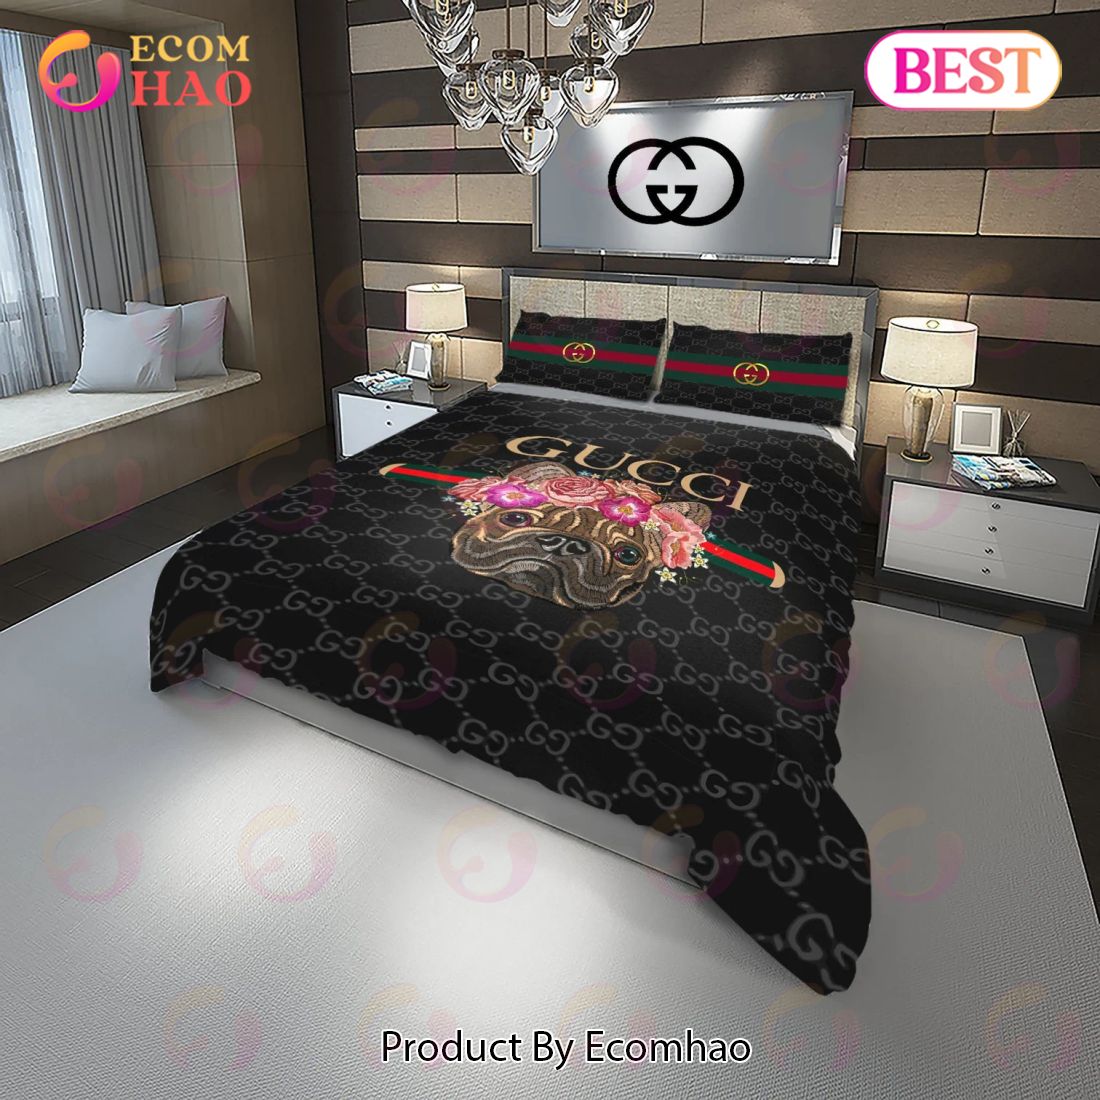 Gucci Doggy And Flowers Fashion Logo Luxury Brand Premium Bedding Setsbed  Sets Bedroom Sets Comforter Sets Duvet Cover Bedspread - Ecomhao Store